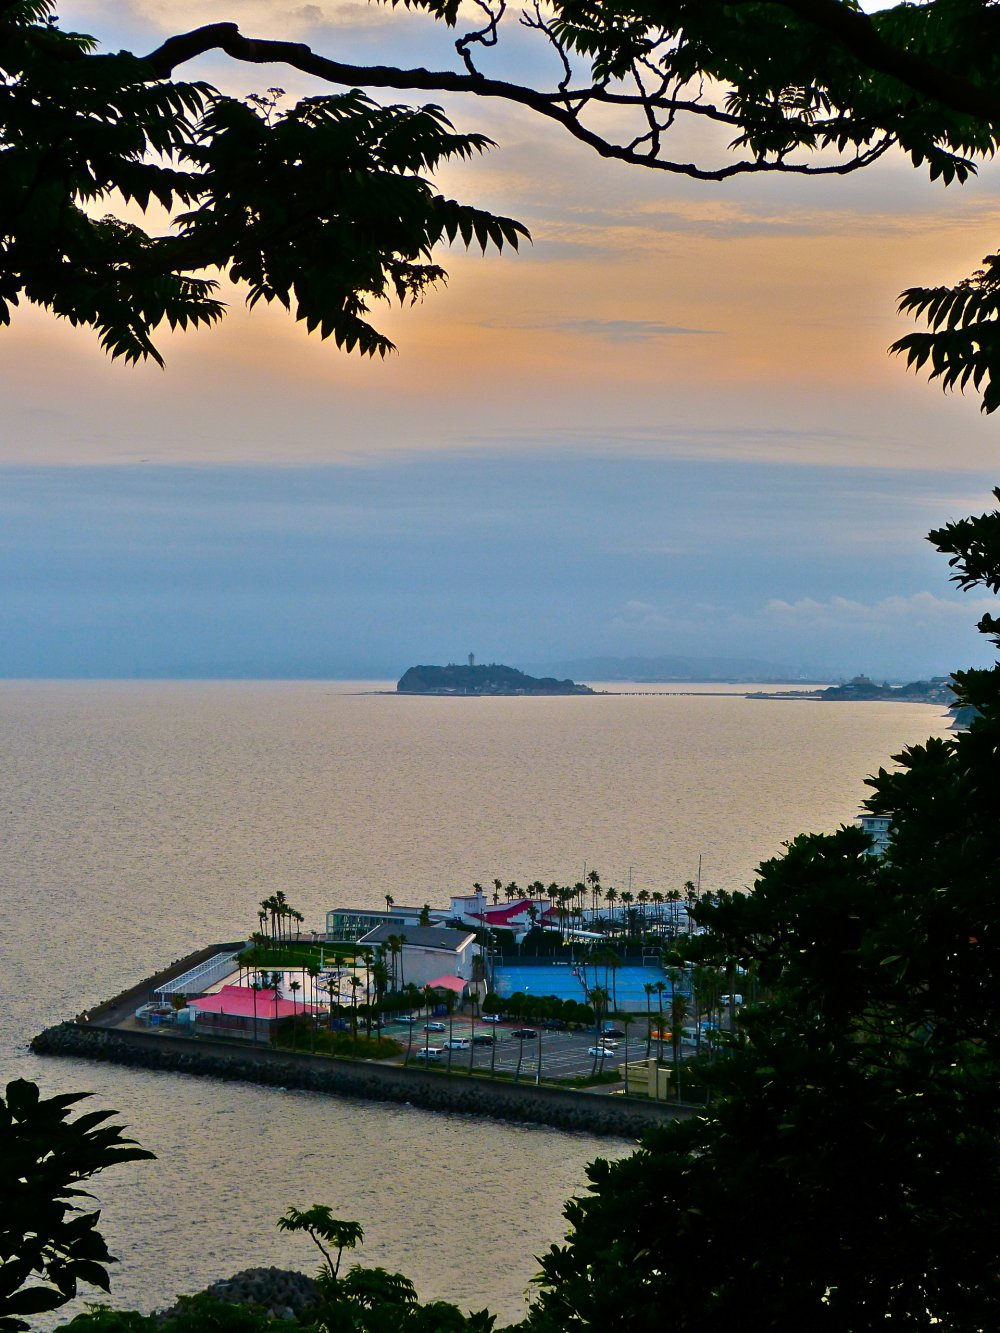 Zushi Marina with Enoshima Island in the background in the evening